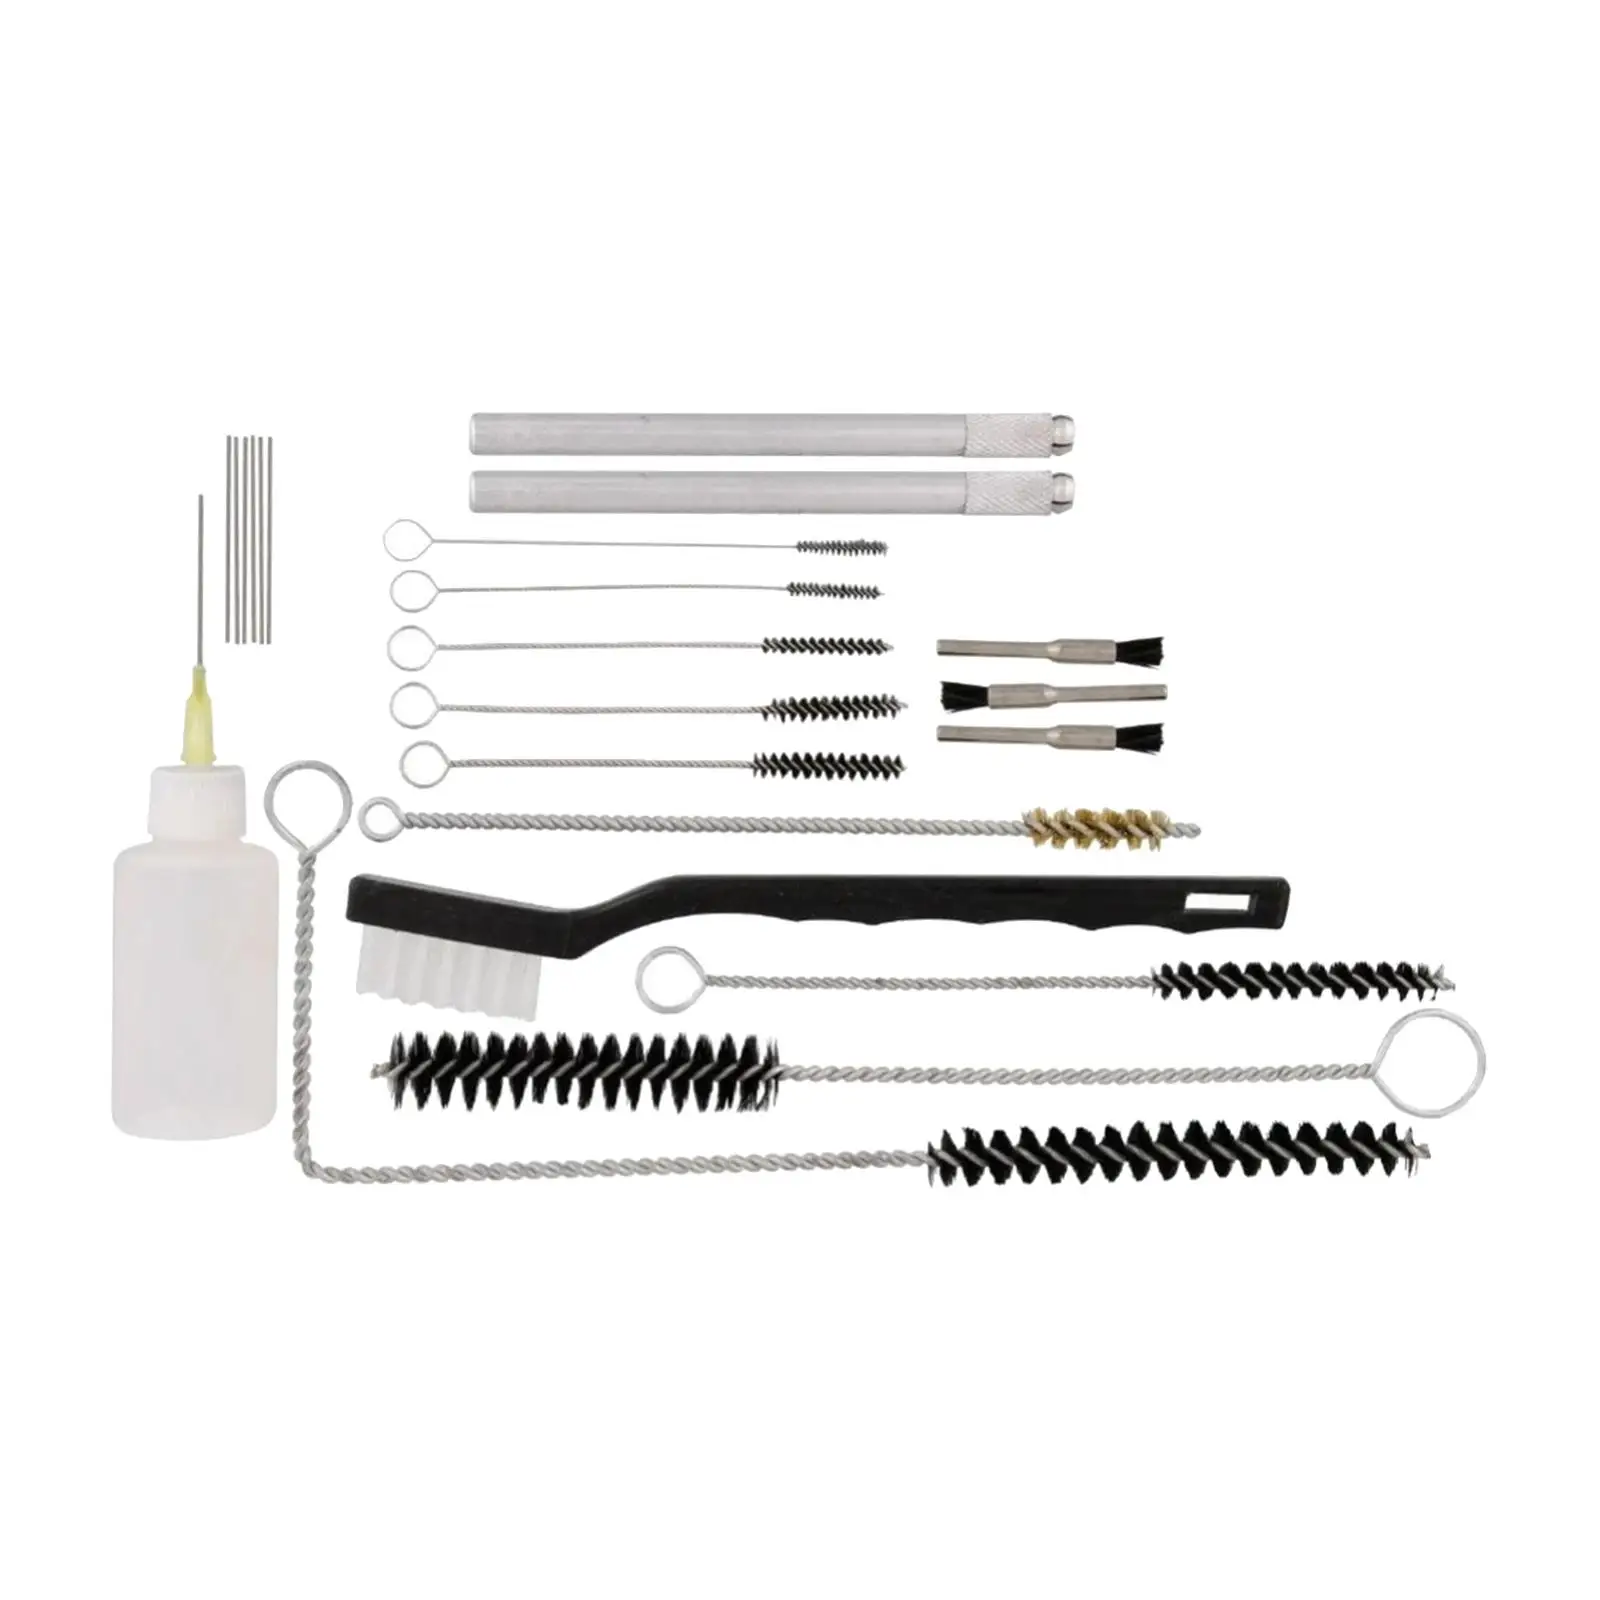 Airbrush Spray Cleaning Repair Tool & Brush Set for Cleaning Thin Tubes